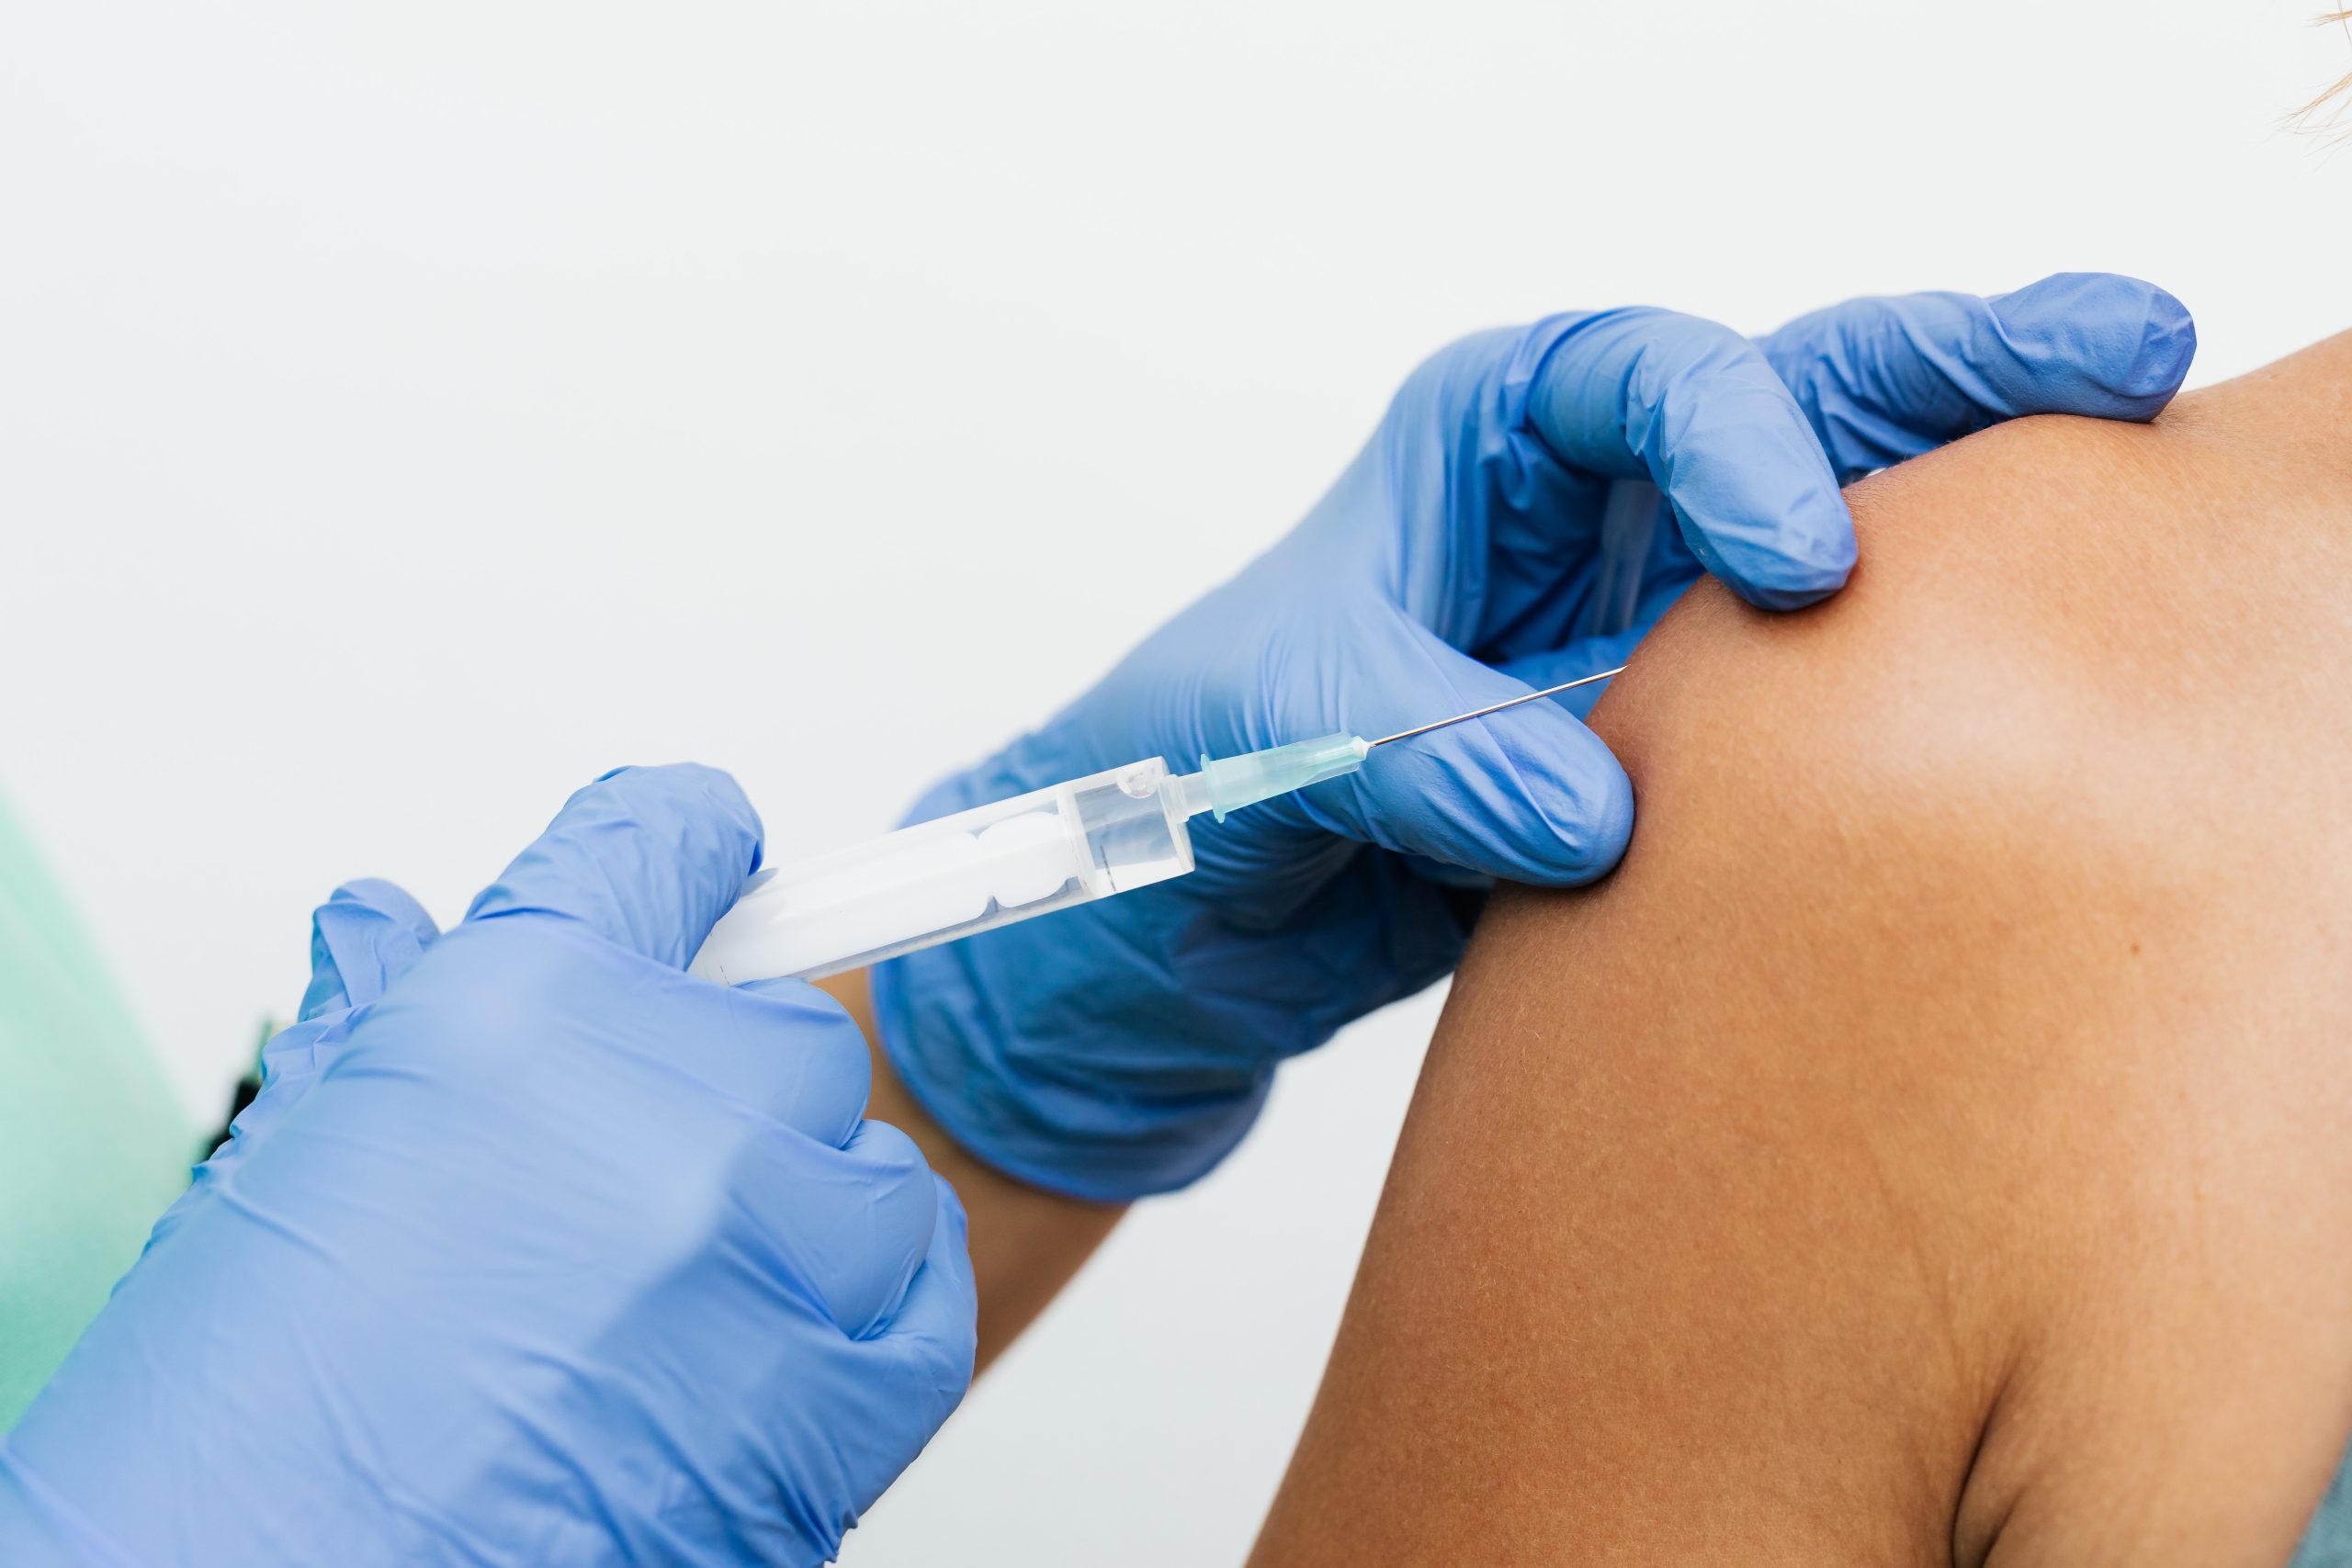 Image of a woman receiving Vitamin B12 injections.